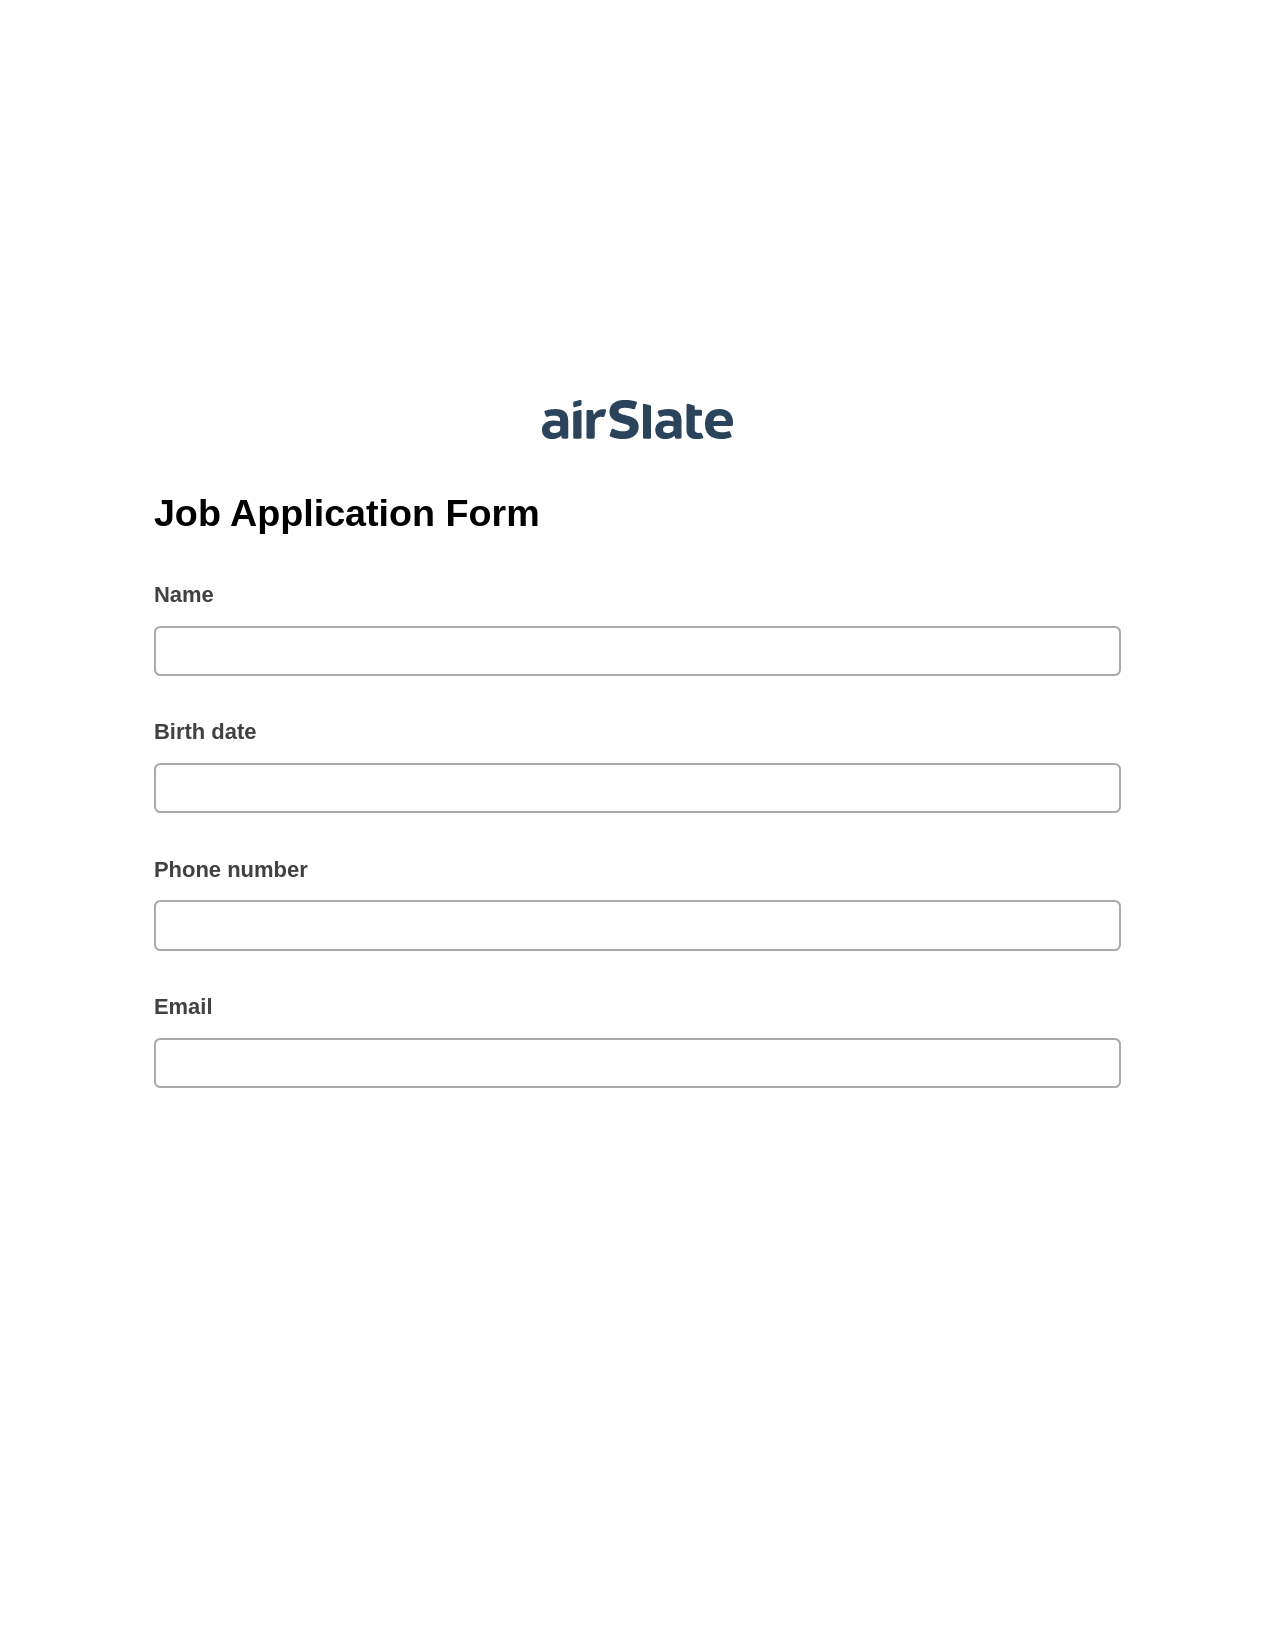 Job Application Form Pre-fill Slate from MS Dynamics 365 Records Bot, Email Notification Bot, Box Bot